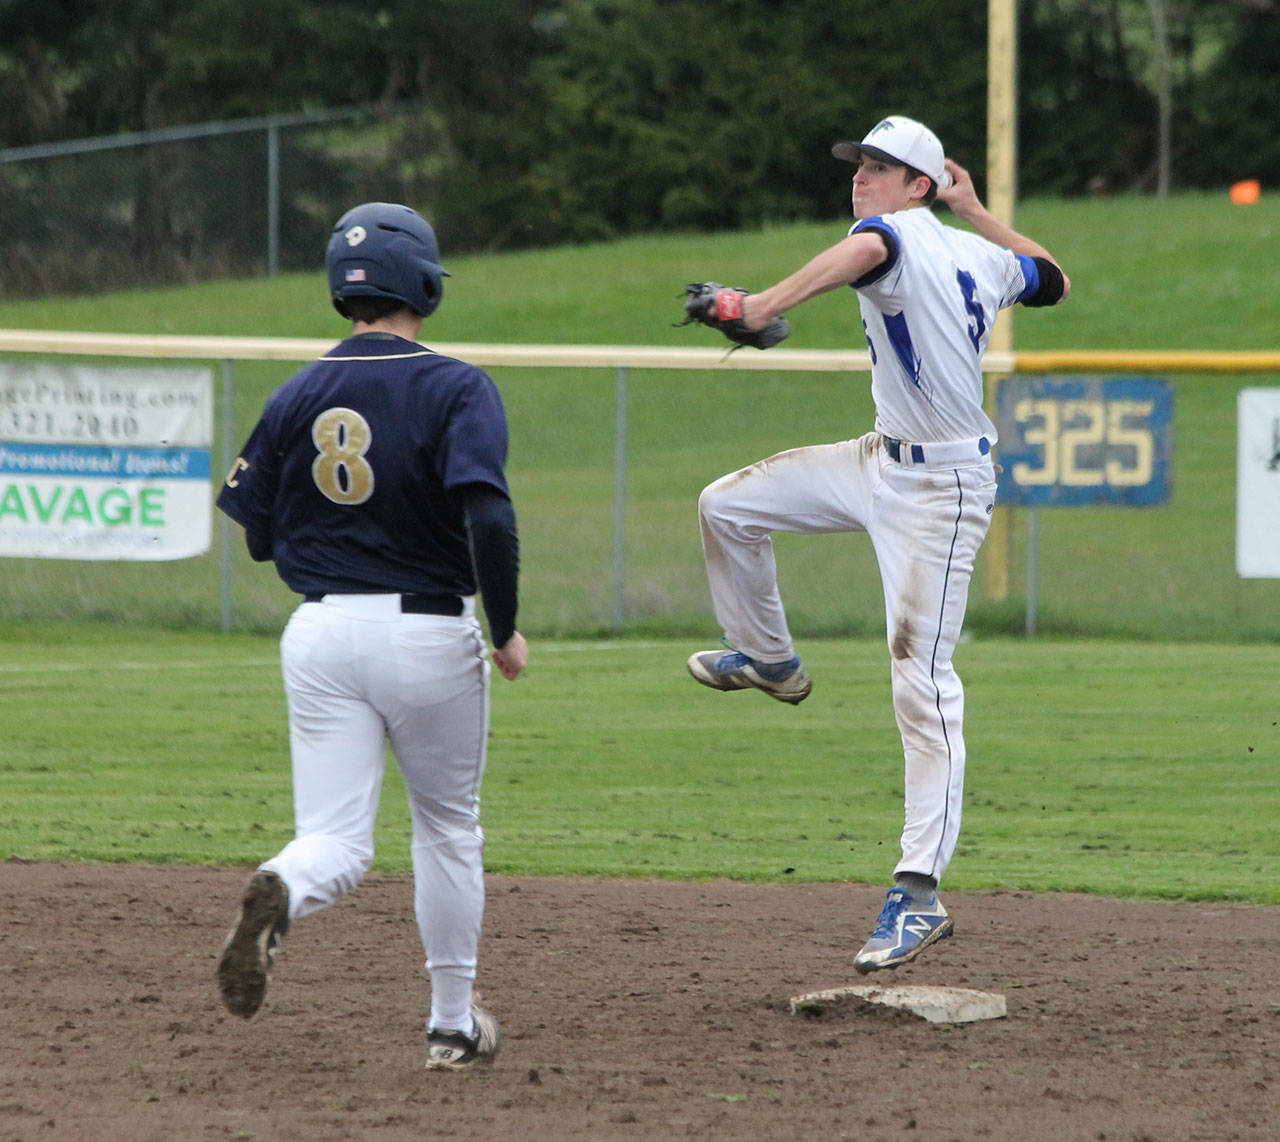 Falcon second baseman Jon Bartel jumps to throw to first in an attempt to turn a double play.(Photo by Jim Waller/South Whidbey Record)